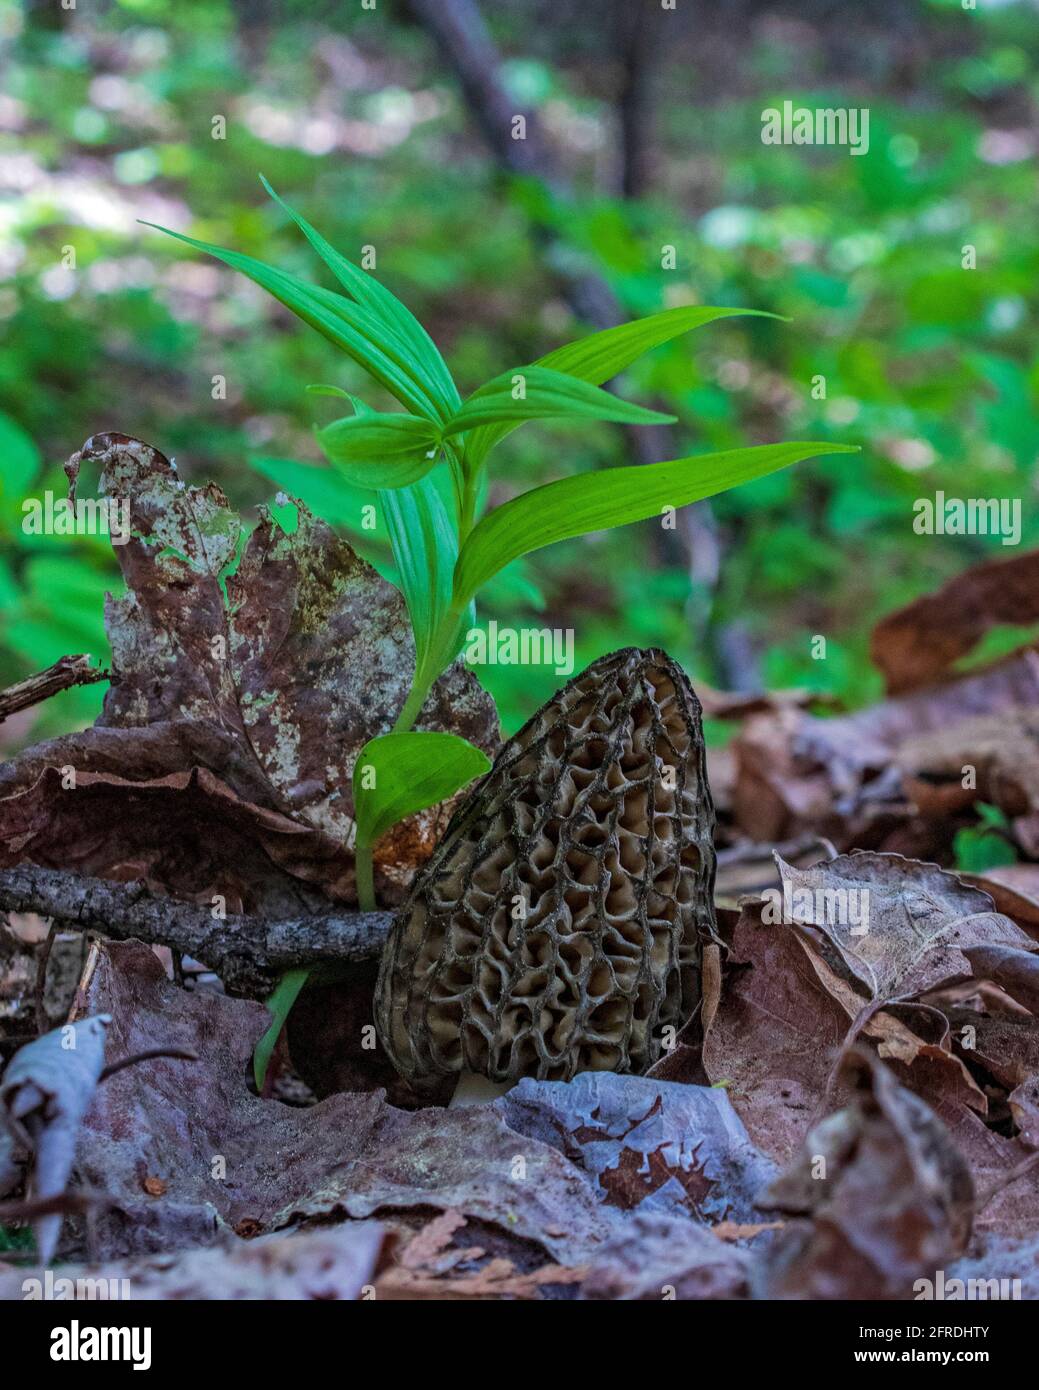 Wild morel mushrooms growing on the forest floor Stock Photo